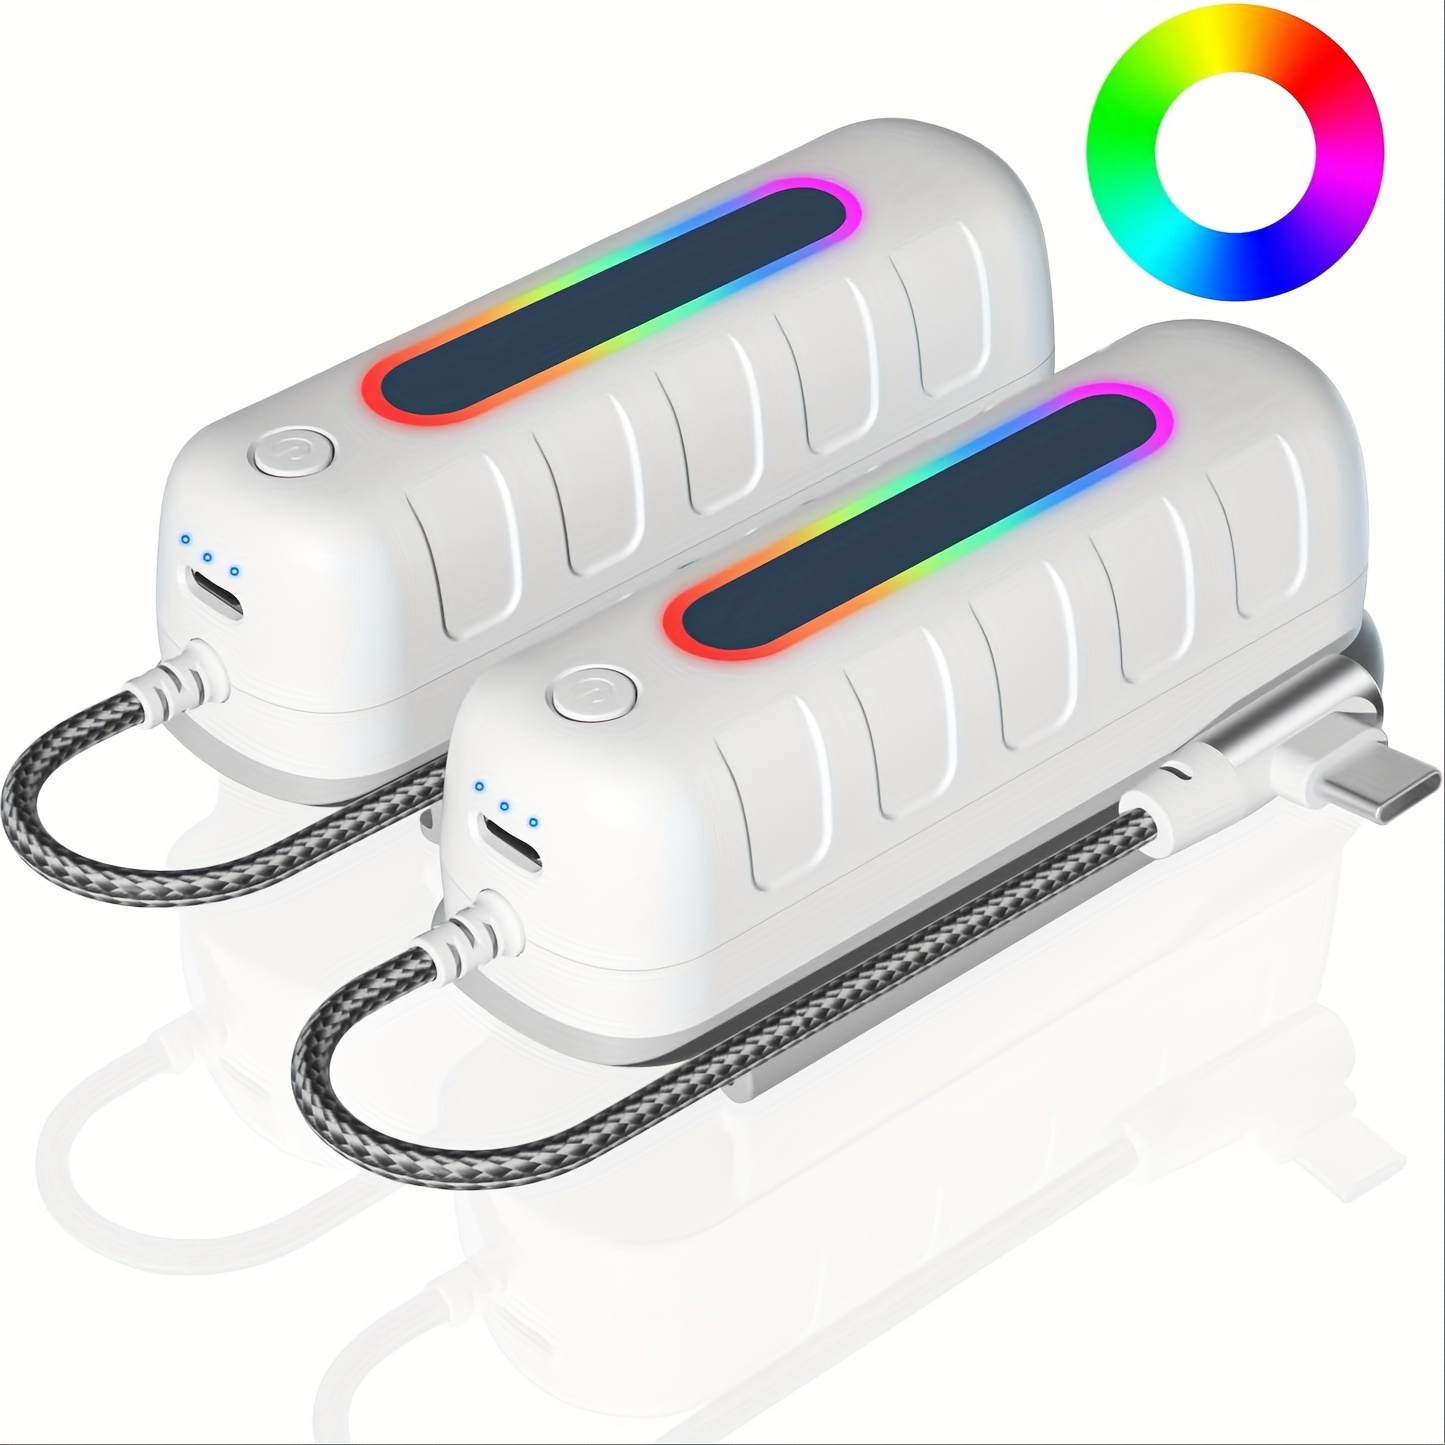 

2 Battery Packs For Oculus Quest 2, 5000mah Extended Power With Multi-colors Rgb Lights Compatible With Original Meta Quest 2 Head Elite Strap Extra 2-4h Playtime 2 Pack (5000mah+ 5000mah)